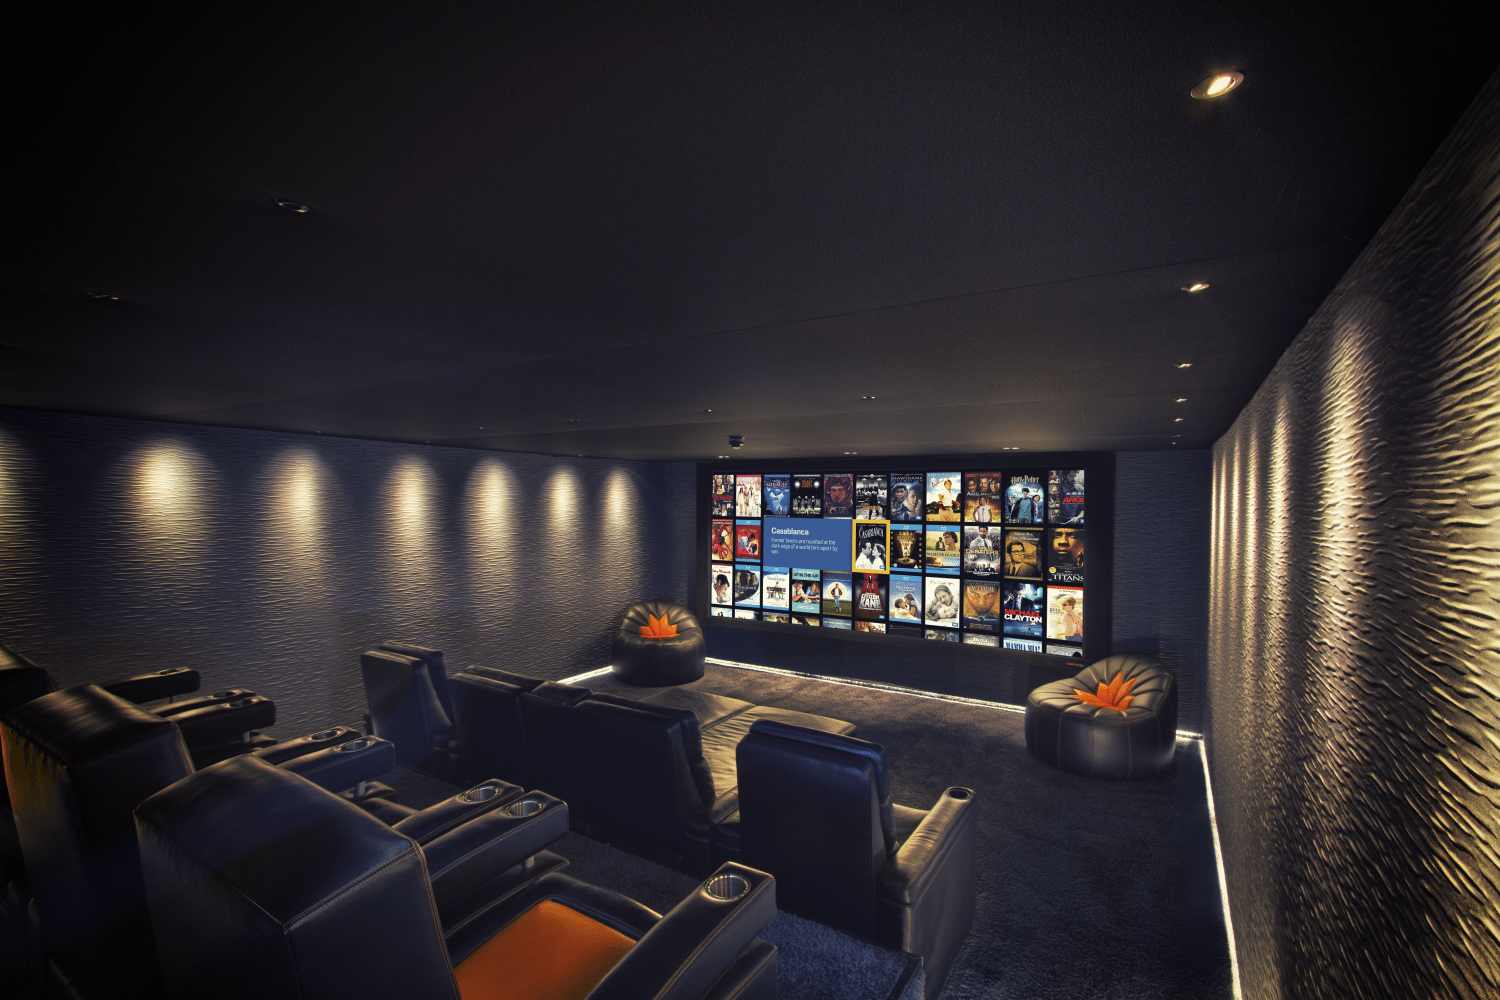 Watch Pulse Cinemas Overhaul Its Demo Facility With New Speakers And More…